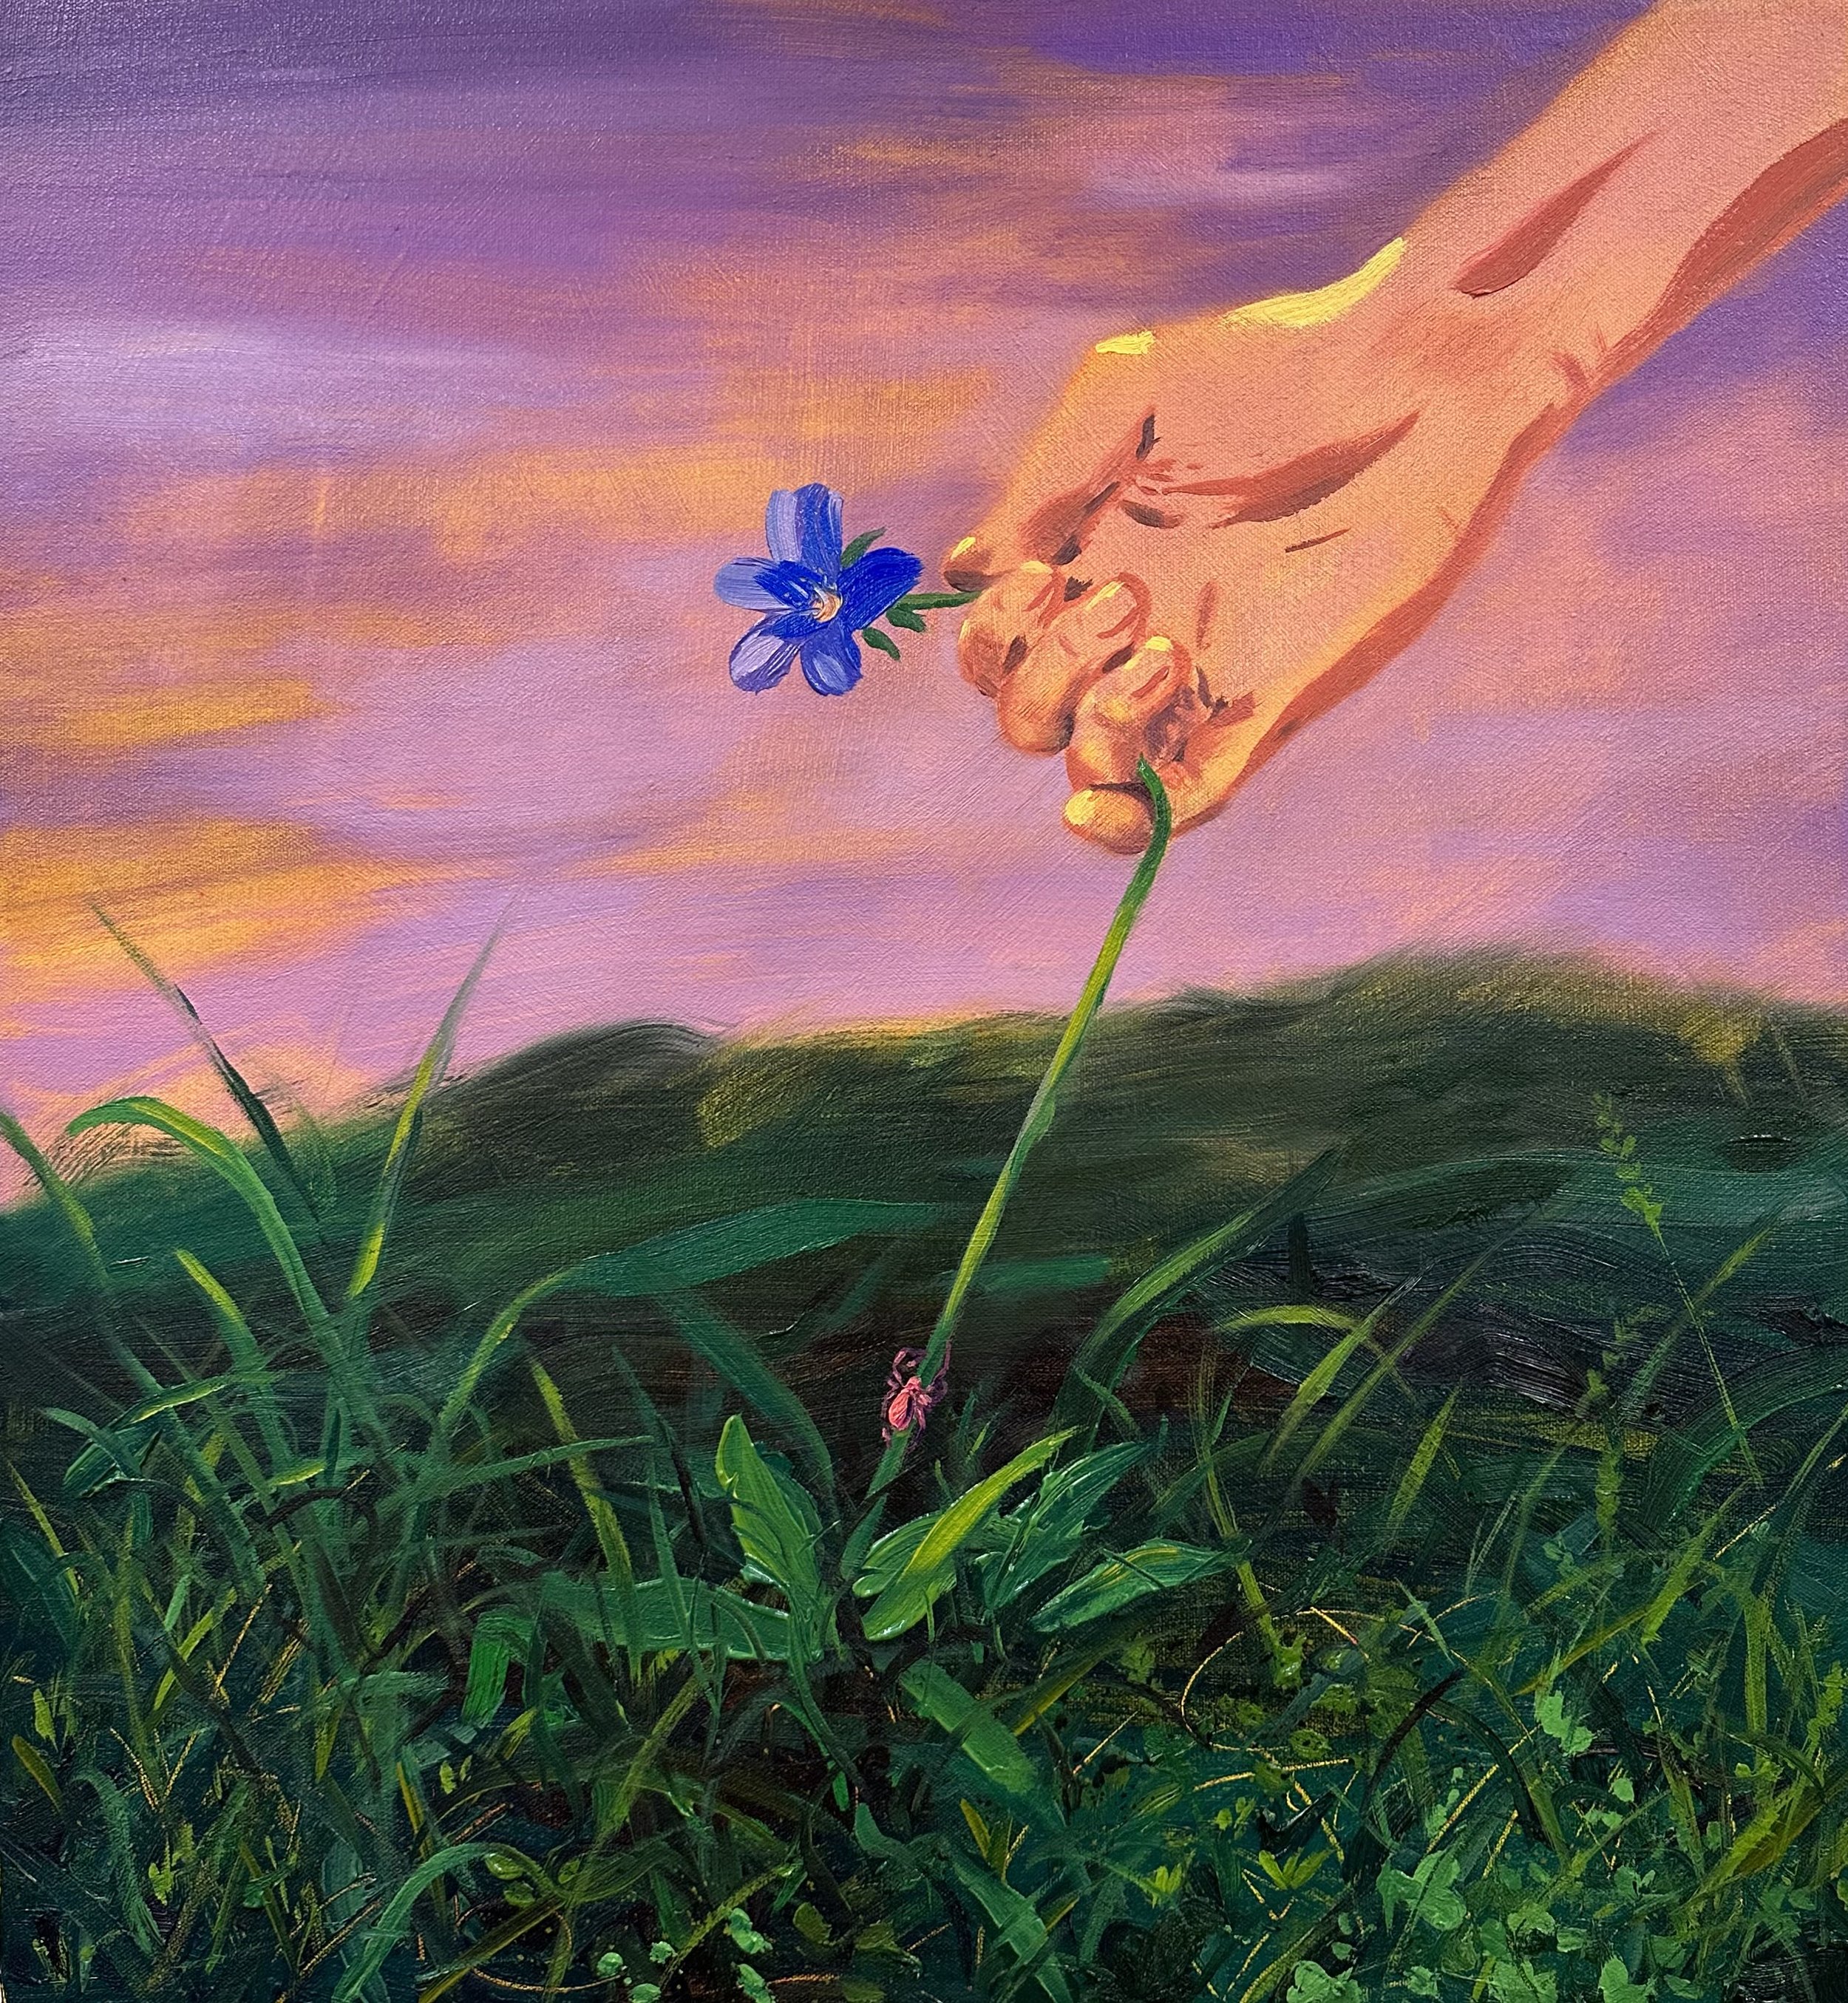   Last Flower   oil on canvas  24 x 20 inches  2023 